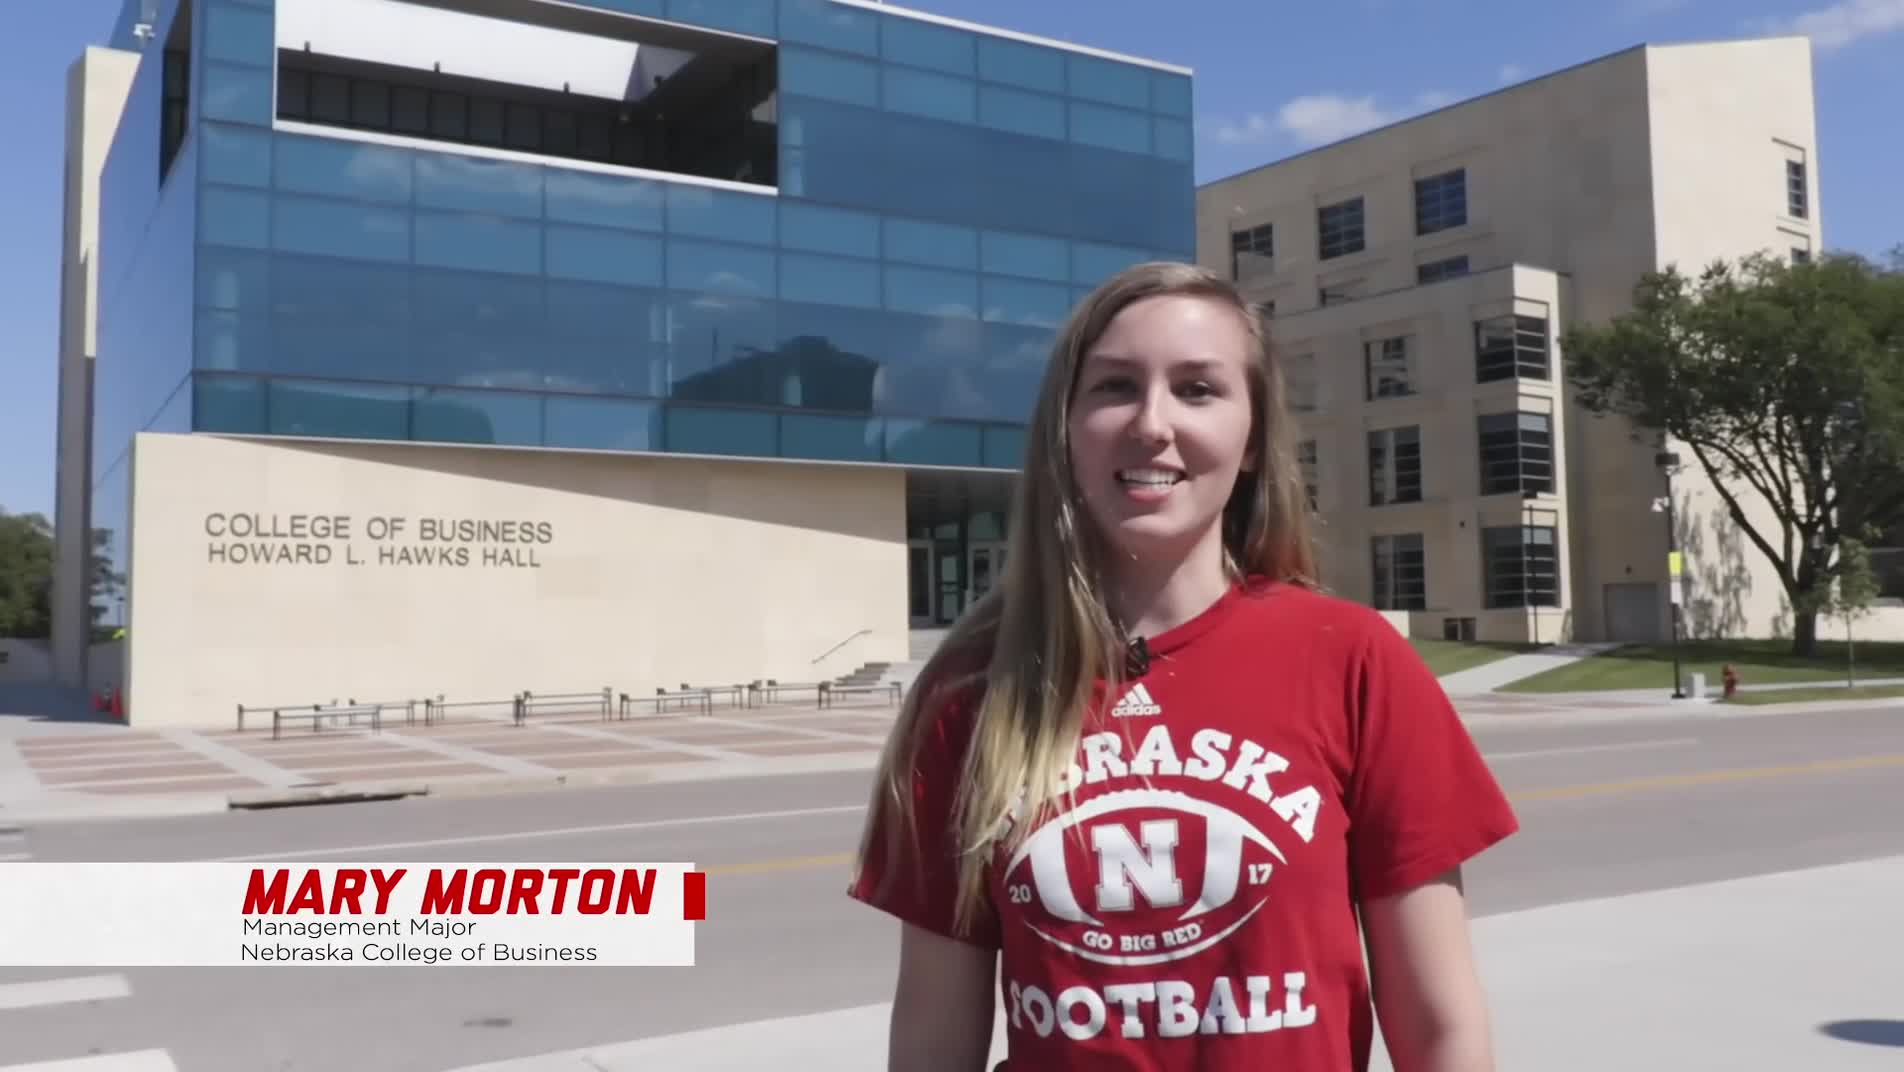 Tour of the Nebraska College of Business